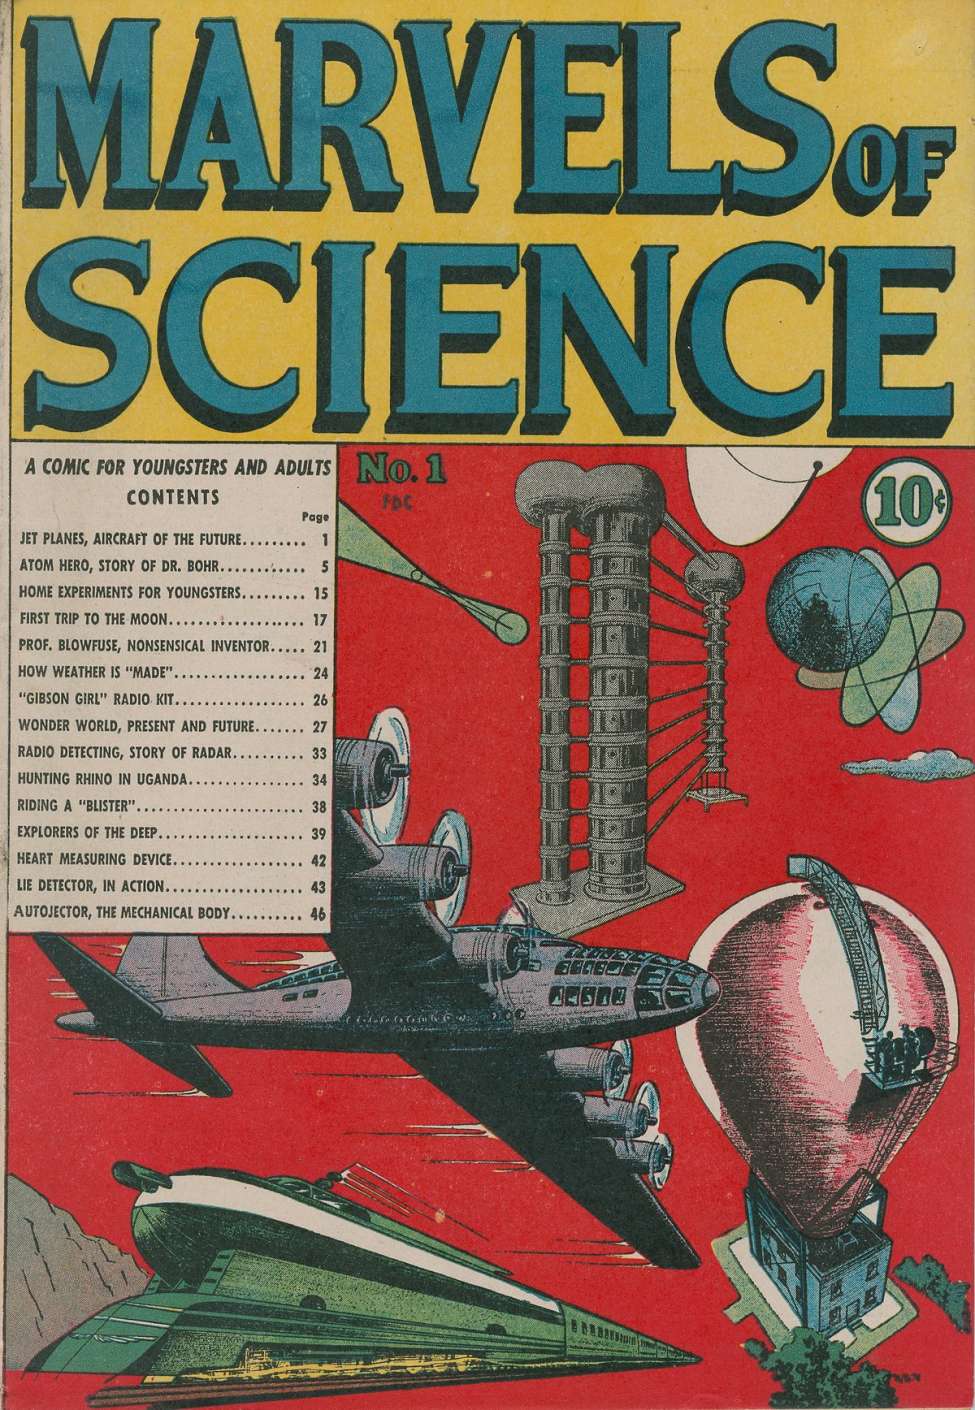 Book Cover For Marvels of Science 1